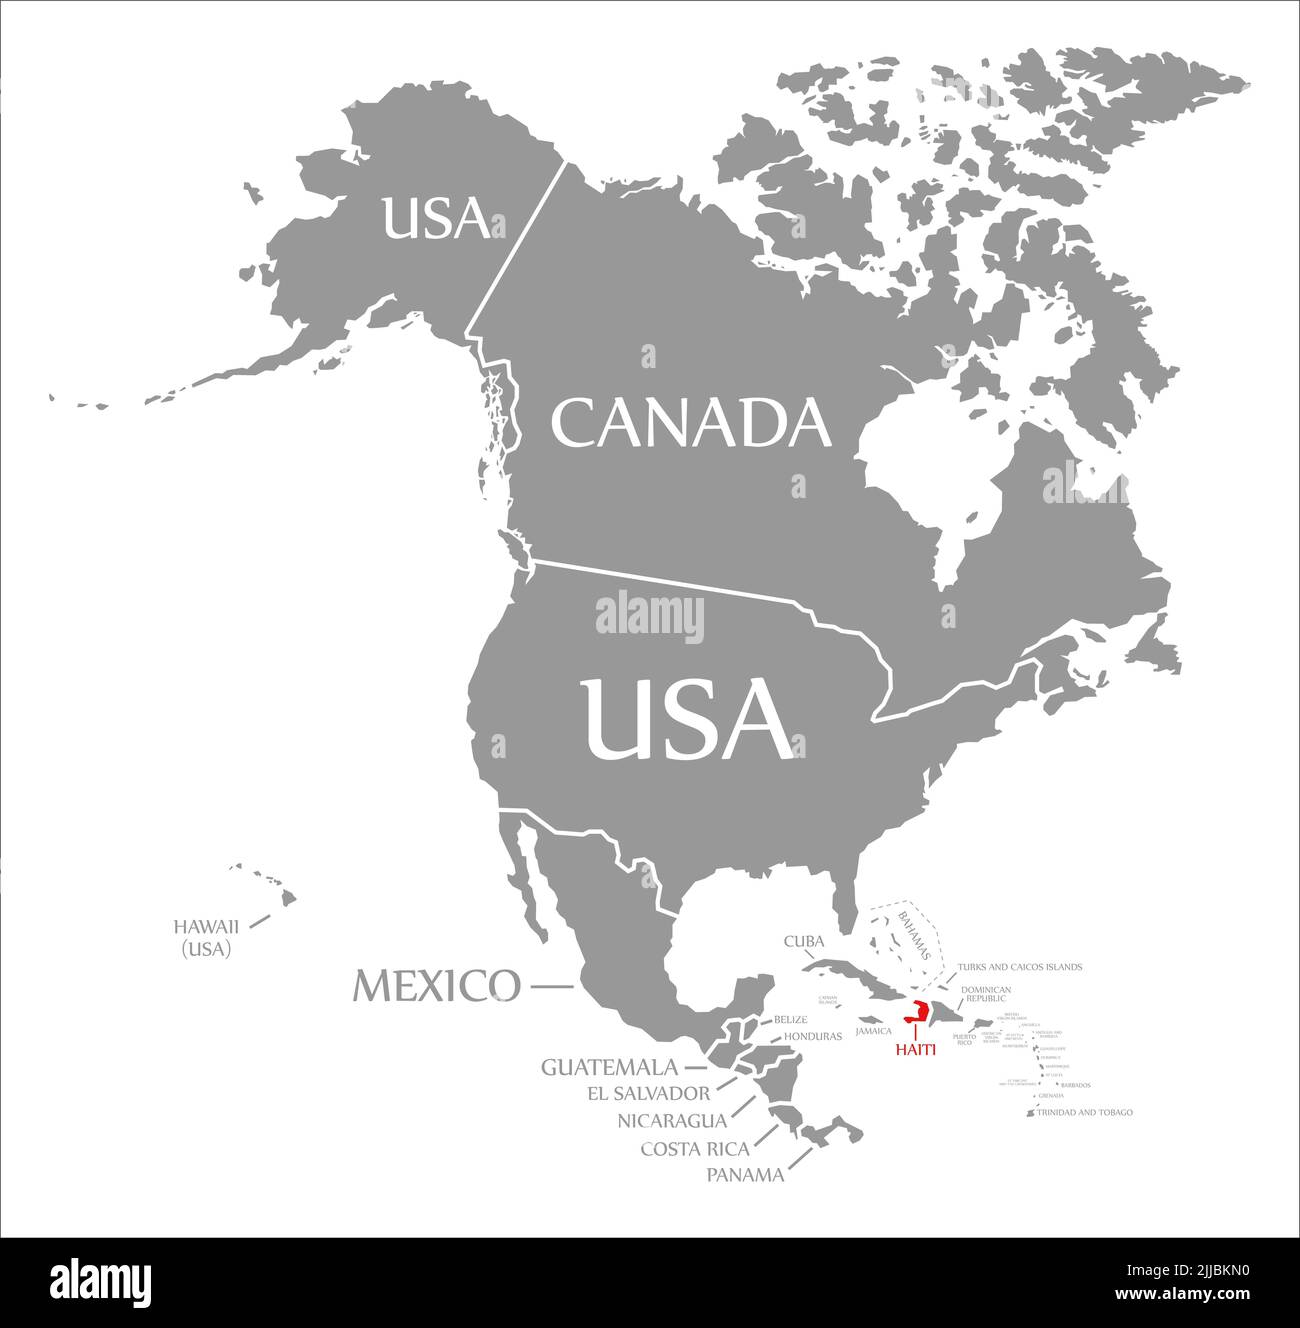 Haiti red highlighted in map of North America Stock Photo